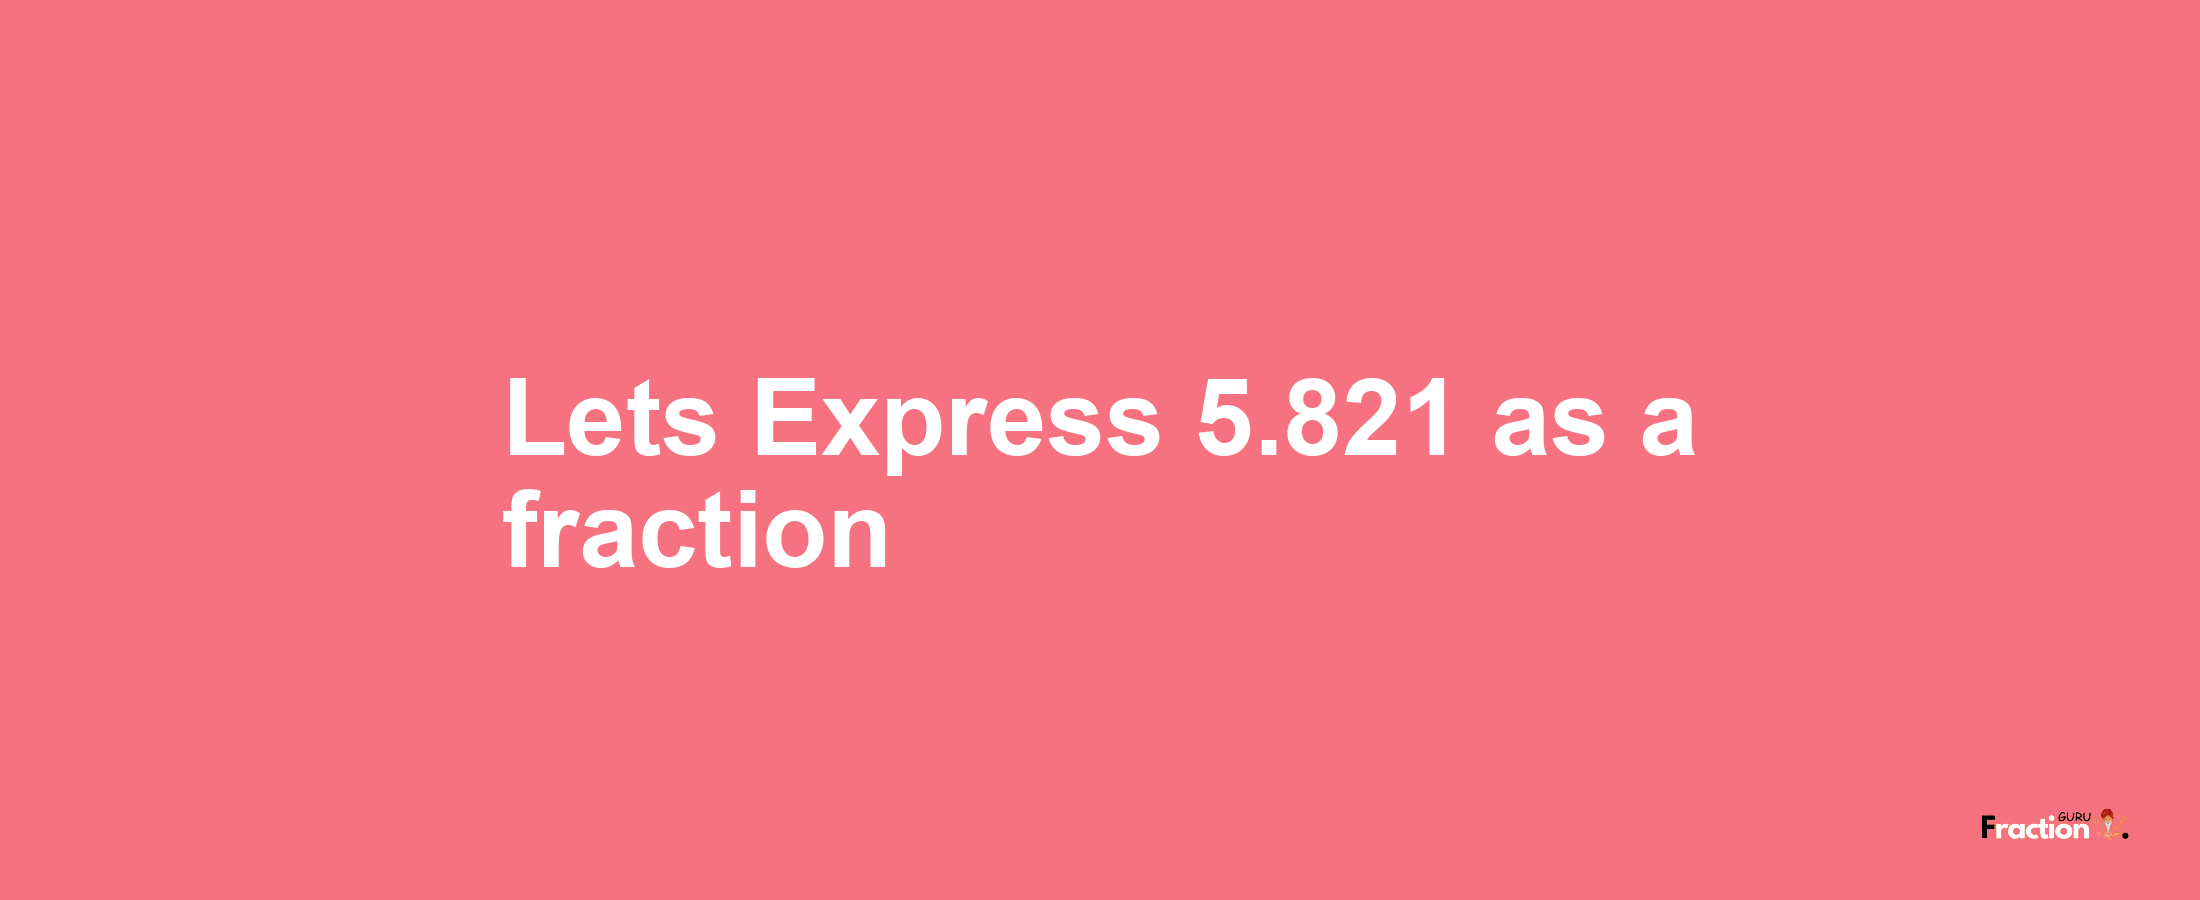 Lets Express 5.821 as afraction